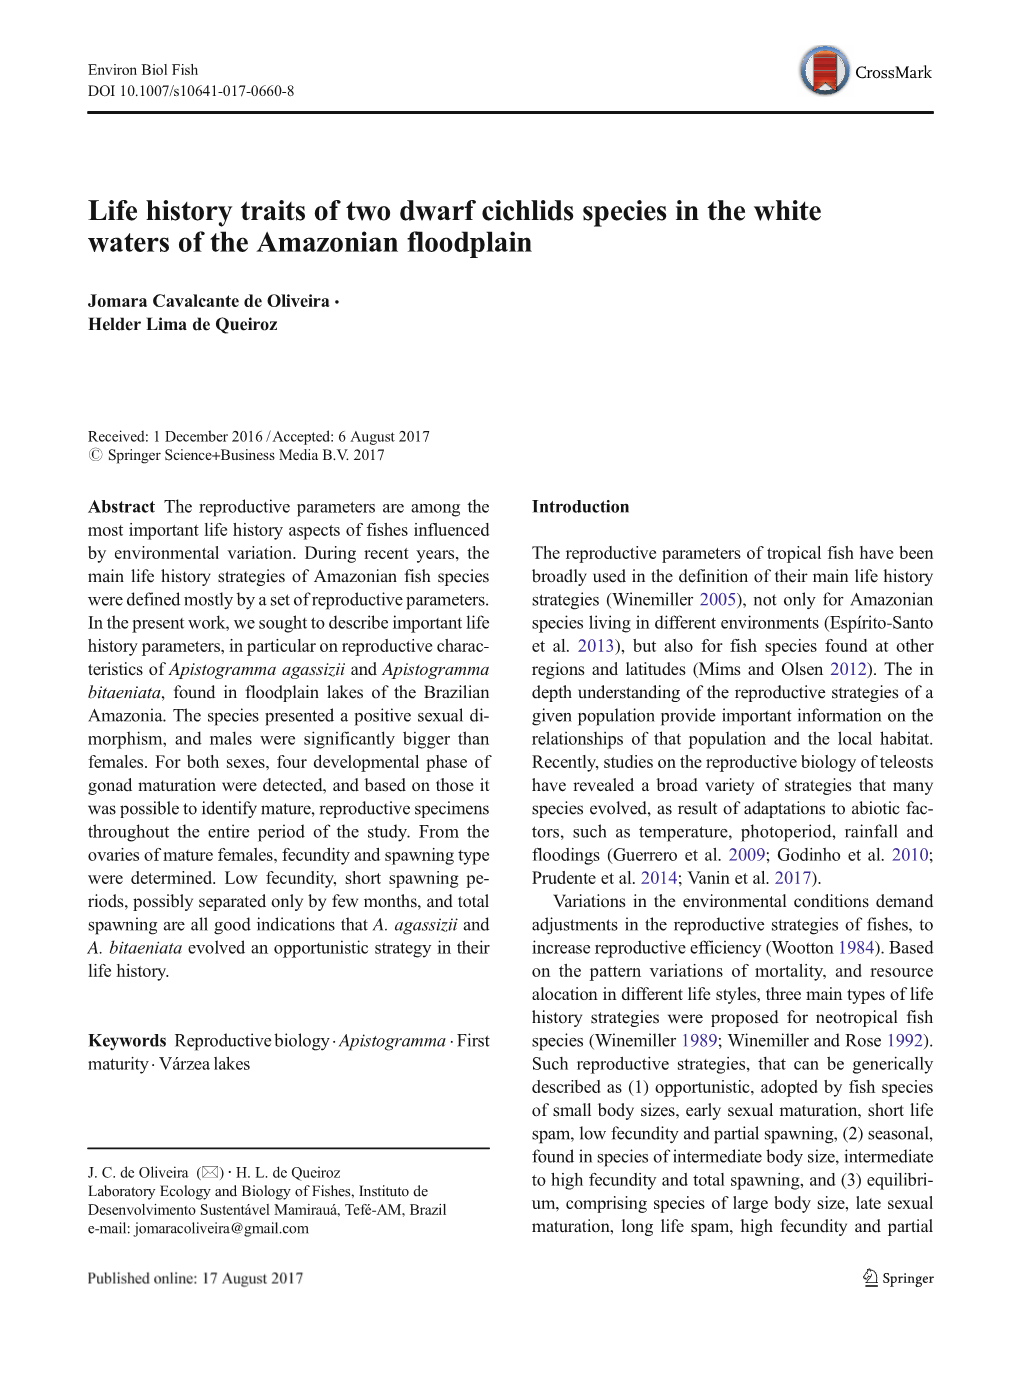 Life History Traits of Two Dwarf Cichlids Species in the White Waters of the Amazonian Floodplain